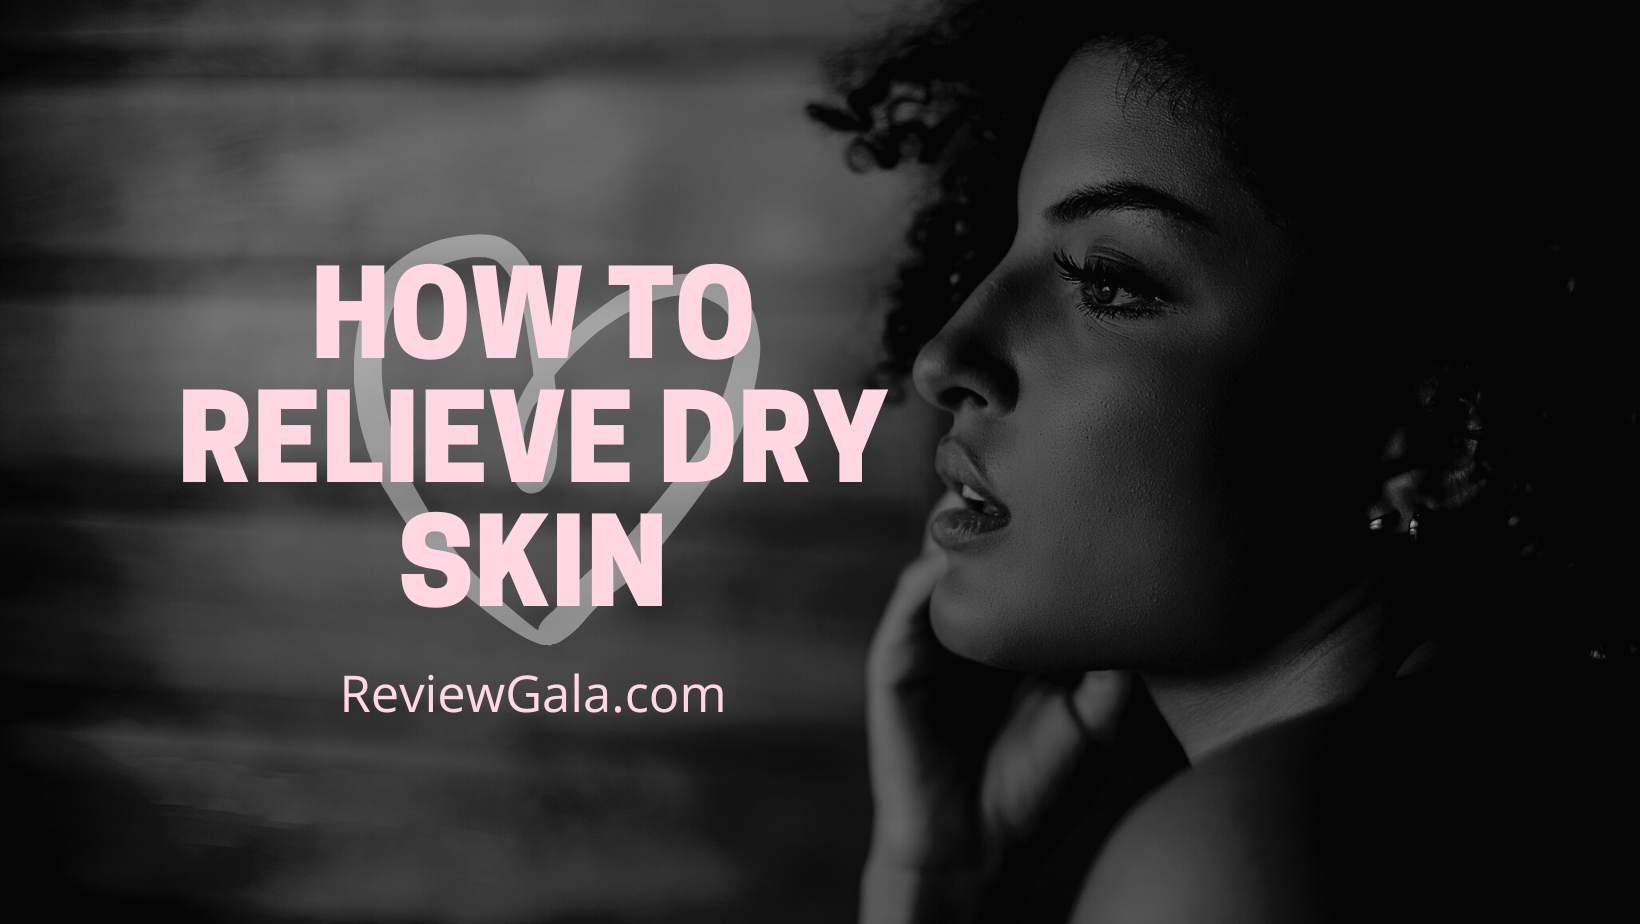 Tips for relieving dry skin